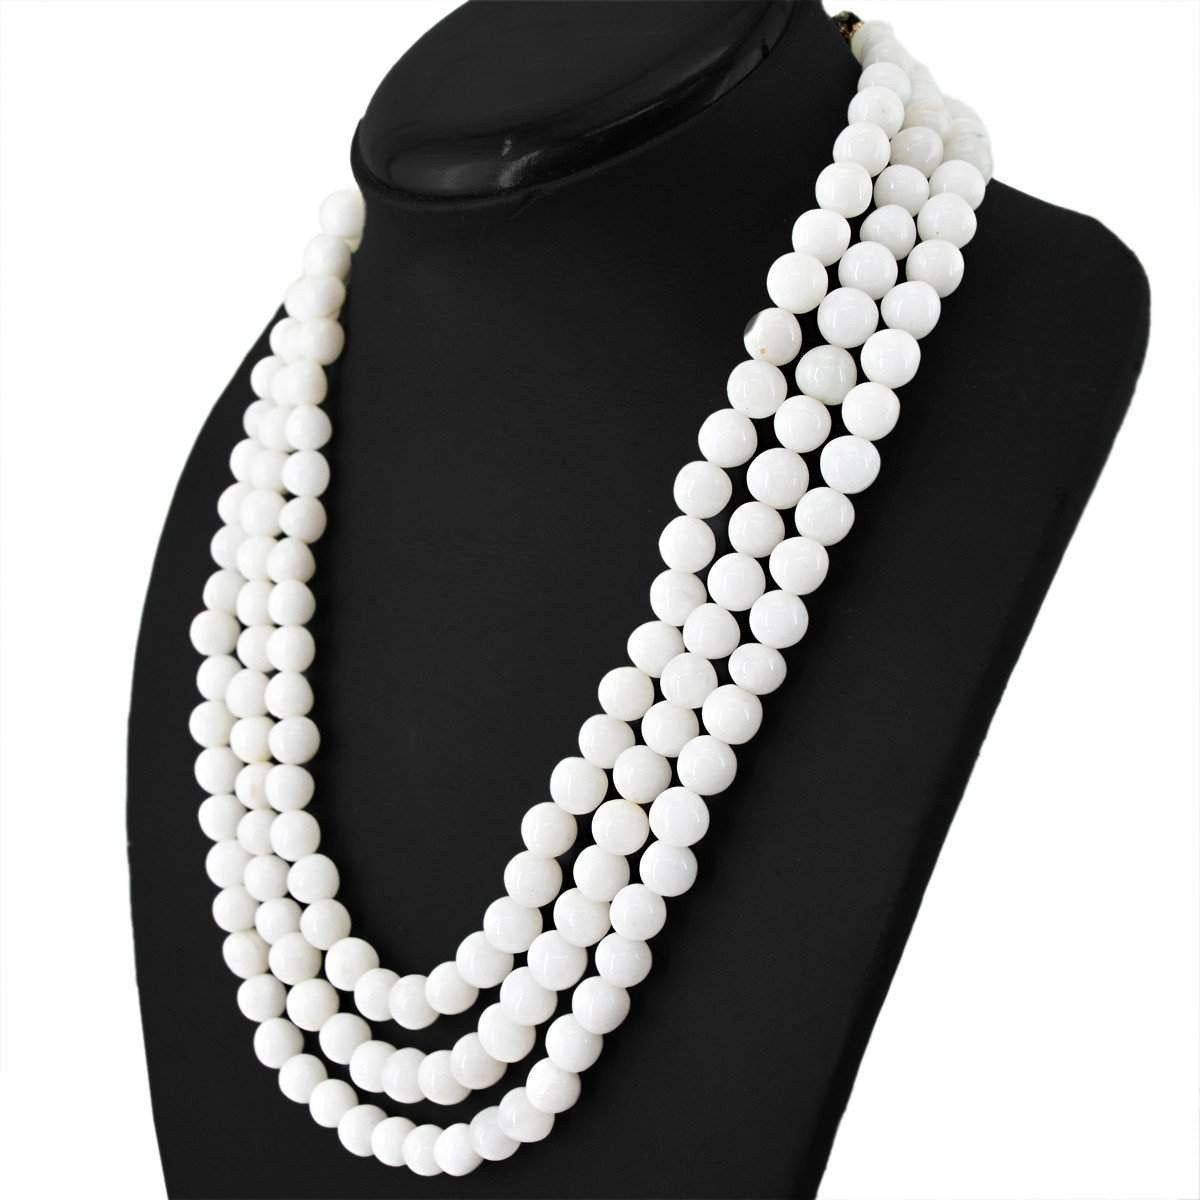 gemsmore:Natural White Agate Necklace 3 Strand Round Shape Beads Necklace